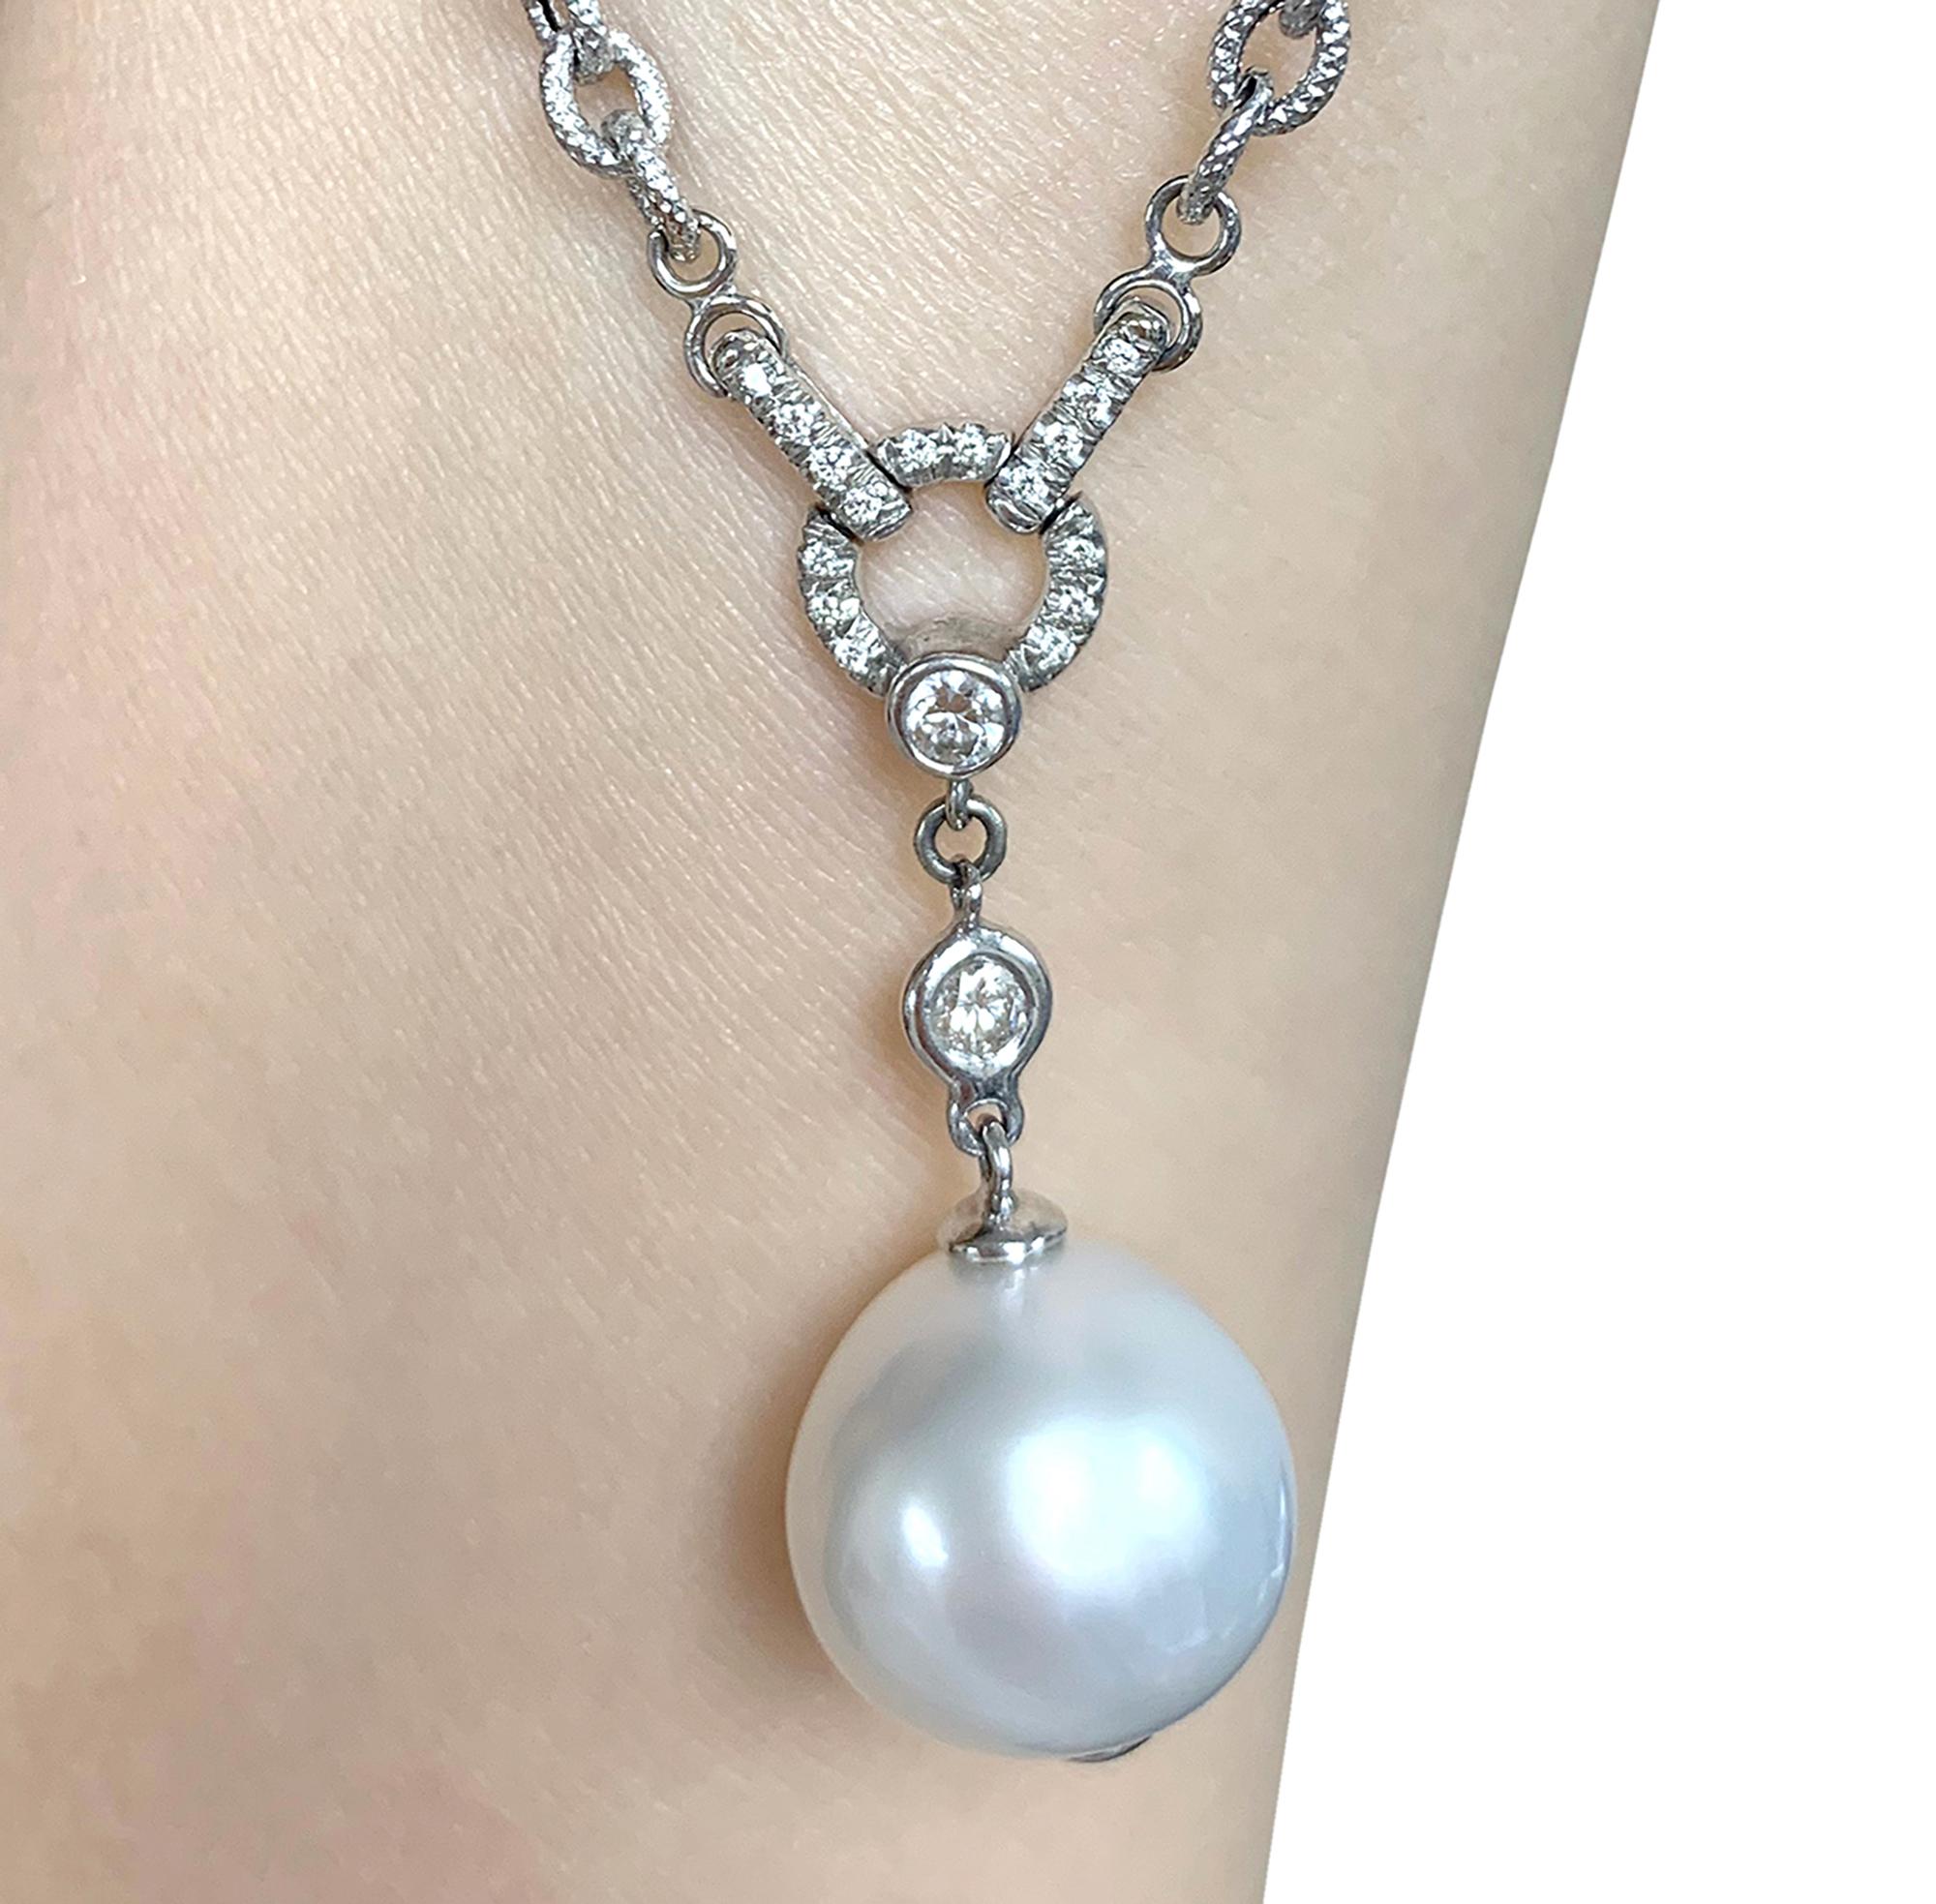 Rubelite Dark Tumble with White South Sea Pearl Drop Necklace in 18K White Gold with Faceted Ribbed Chain, form 'G-One' Collection

Length: 20